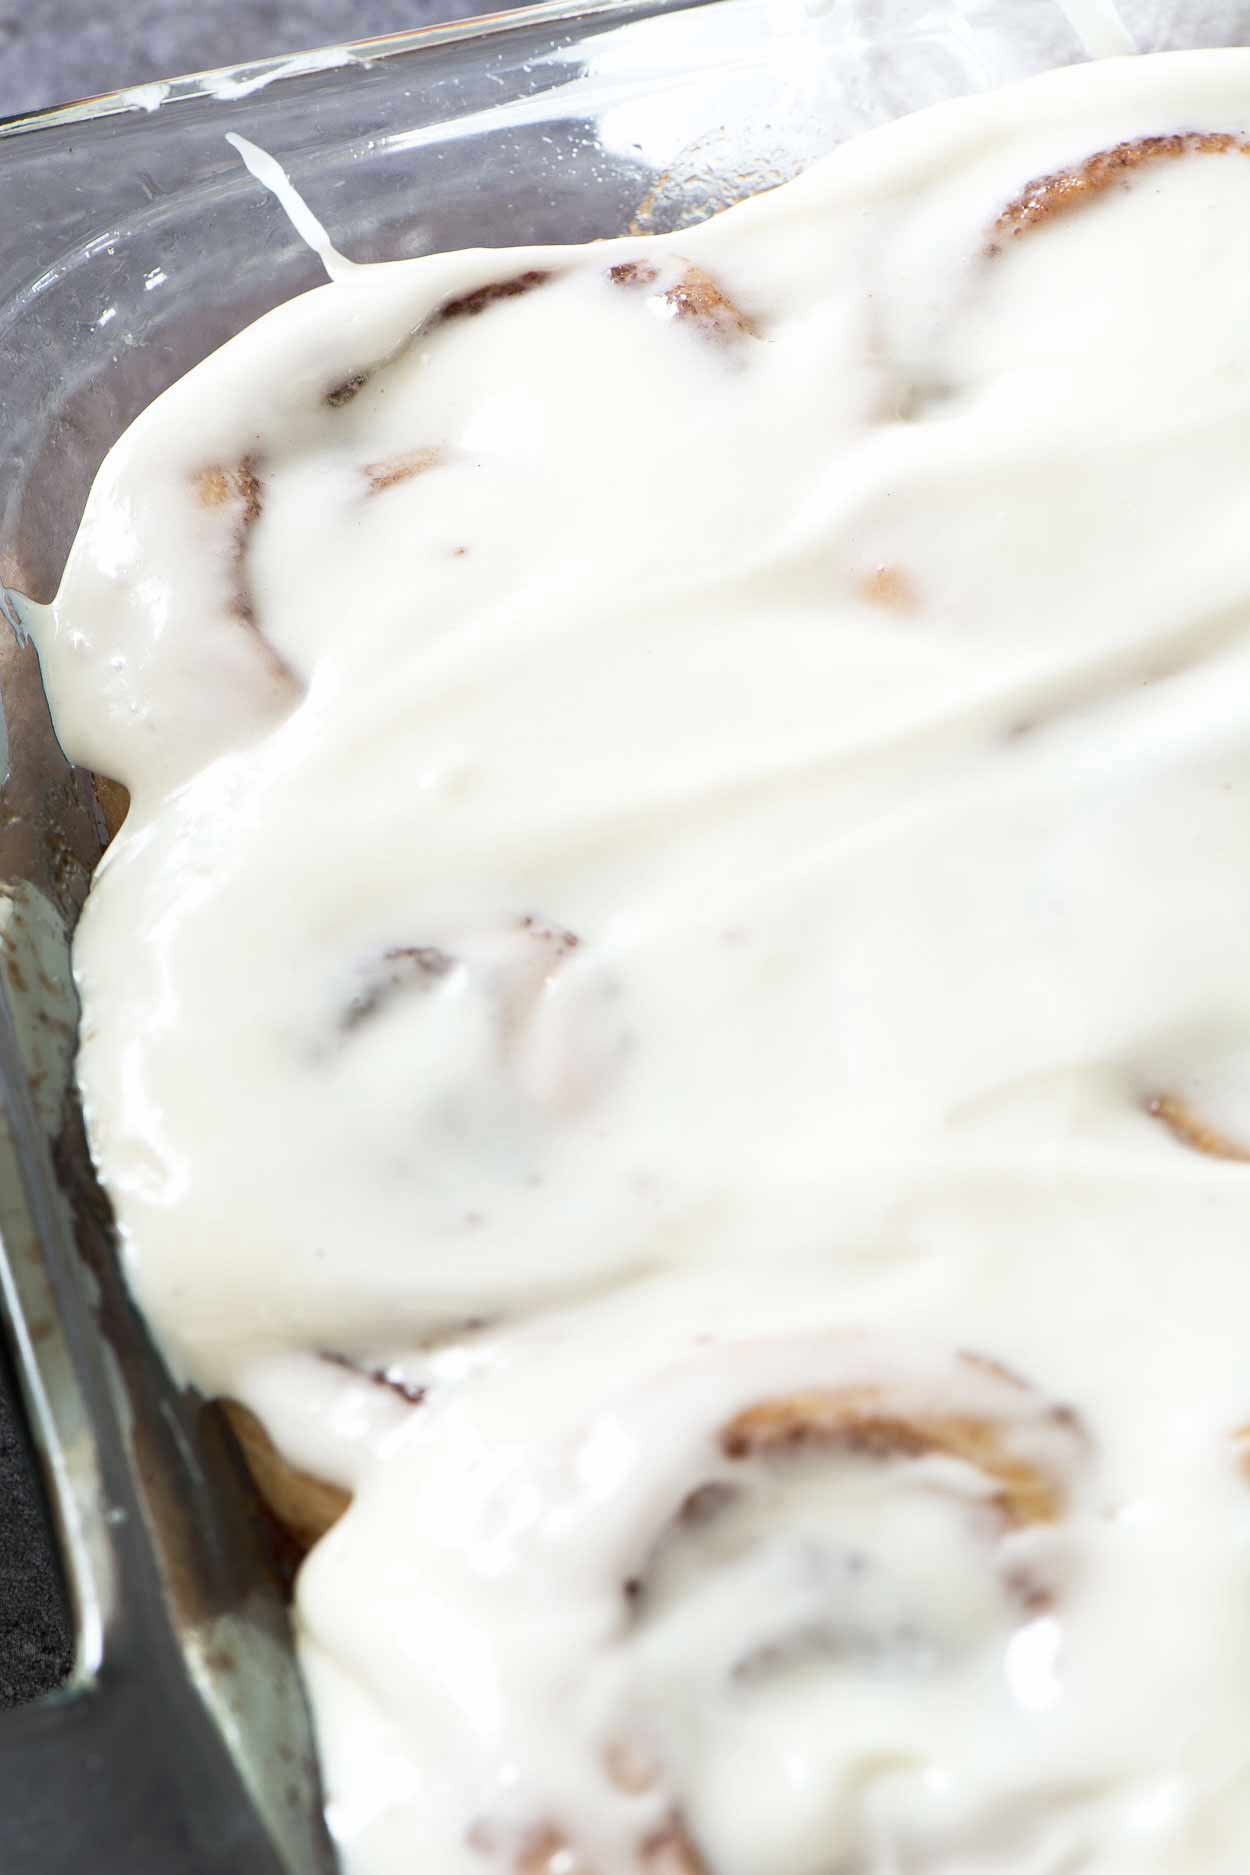 Made from scratch jumbo cinnamon rolls that are light and flaky. Filled with brown sugar, cinnamon and topped with a generous layer of cream cheese icing. | simplerevisions.com